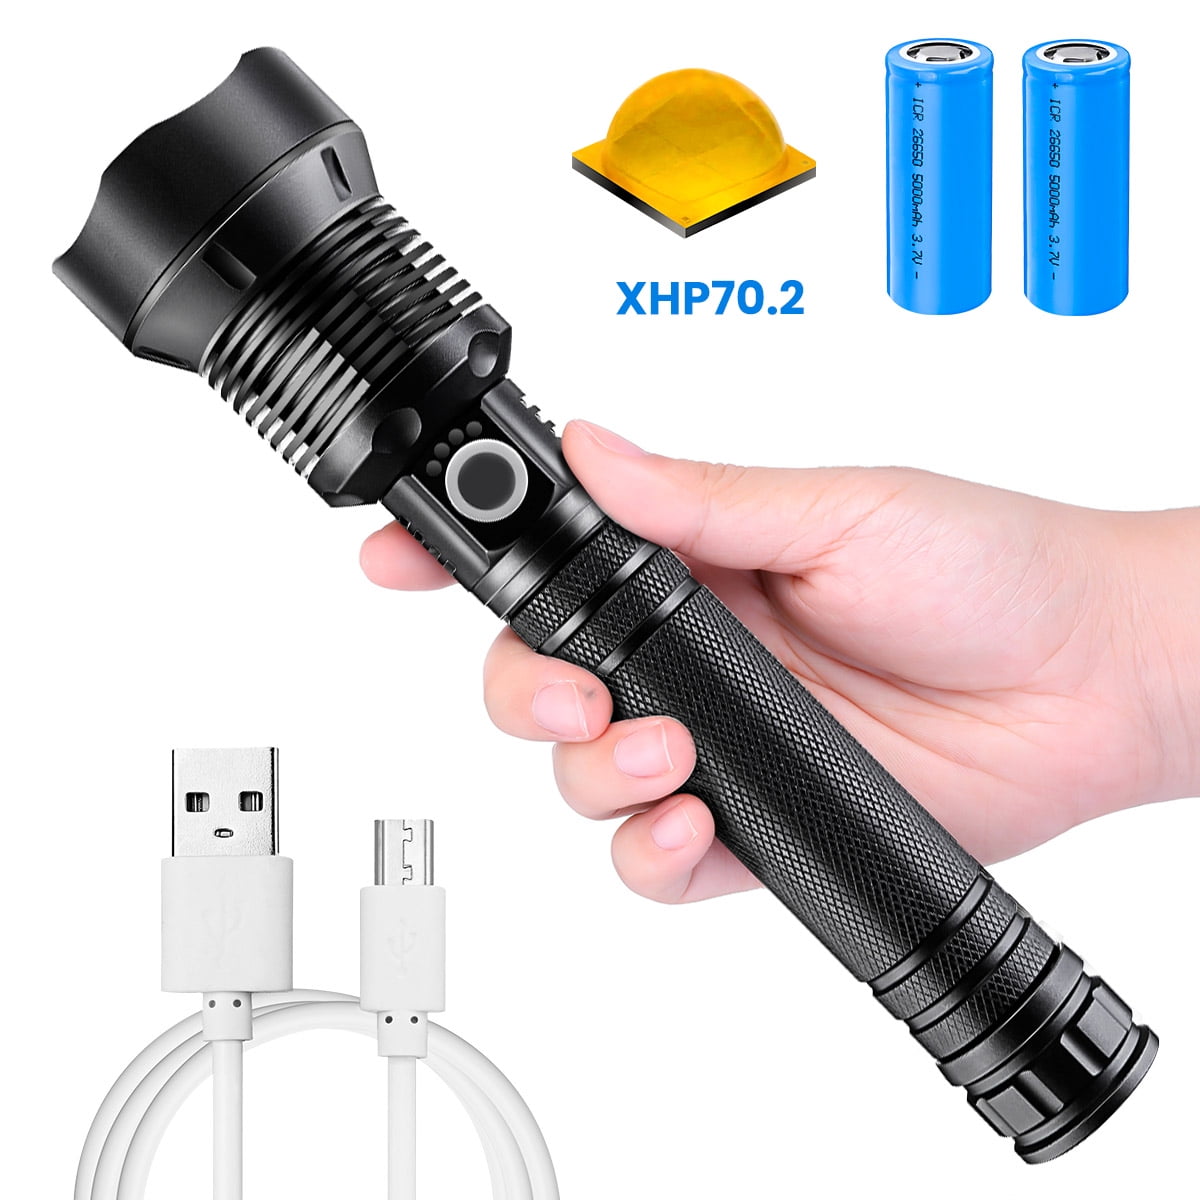 Batteries Included IPX5 Waterproof LED Flashlight Zoomable Rechargeable Tactical Flashlight 90000 High Lumens,5 Modes Power Bank Bright Flashlight for Outdoor/Indoor/Emergencies